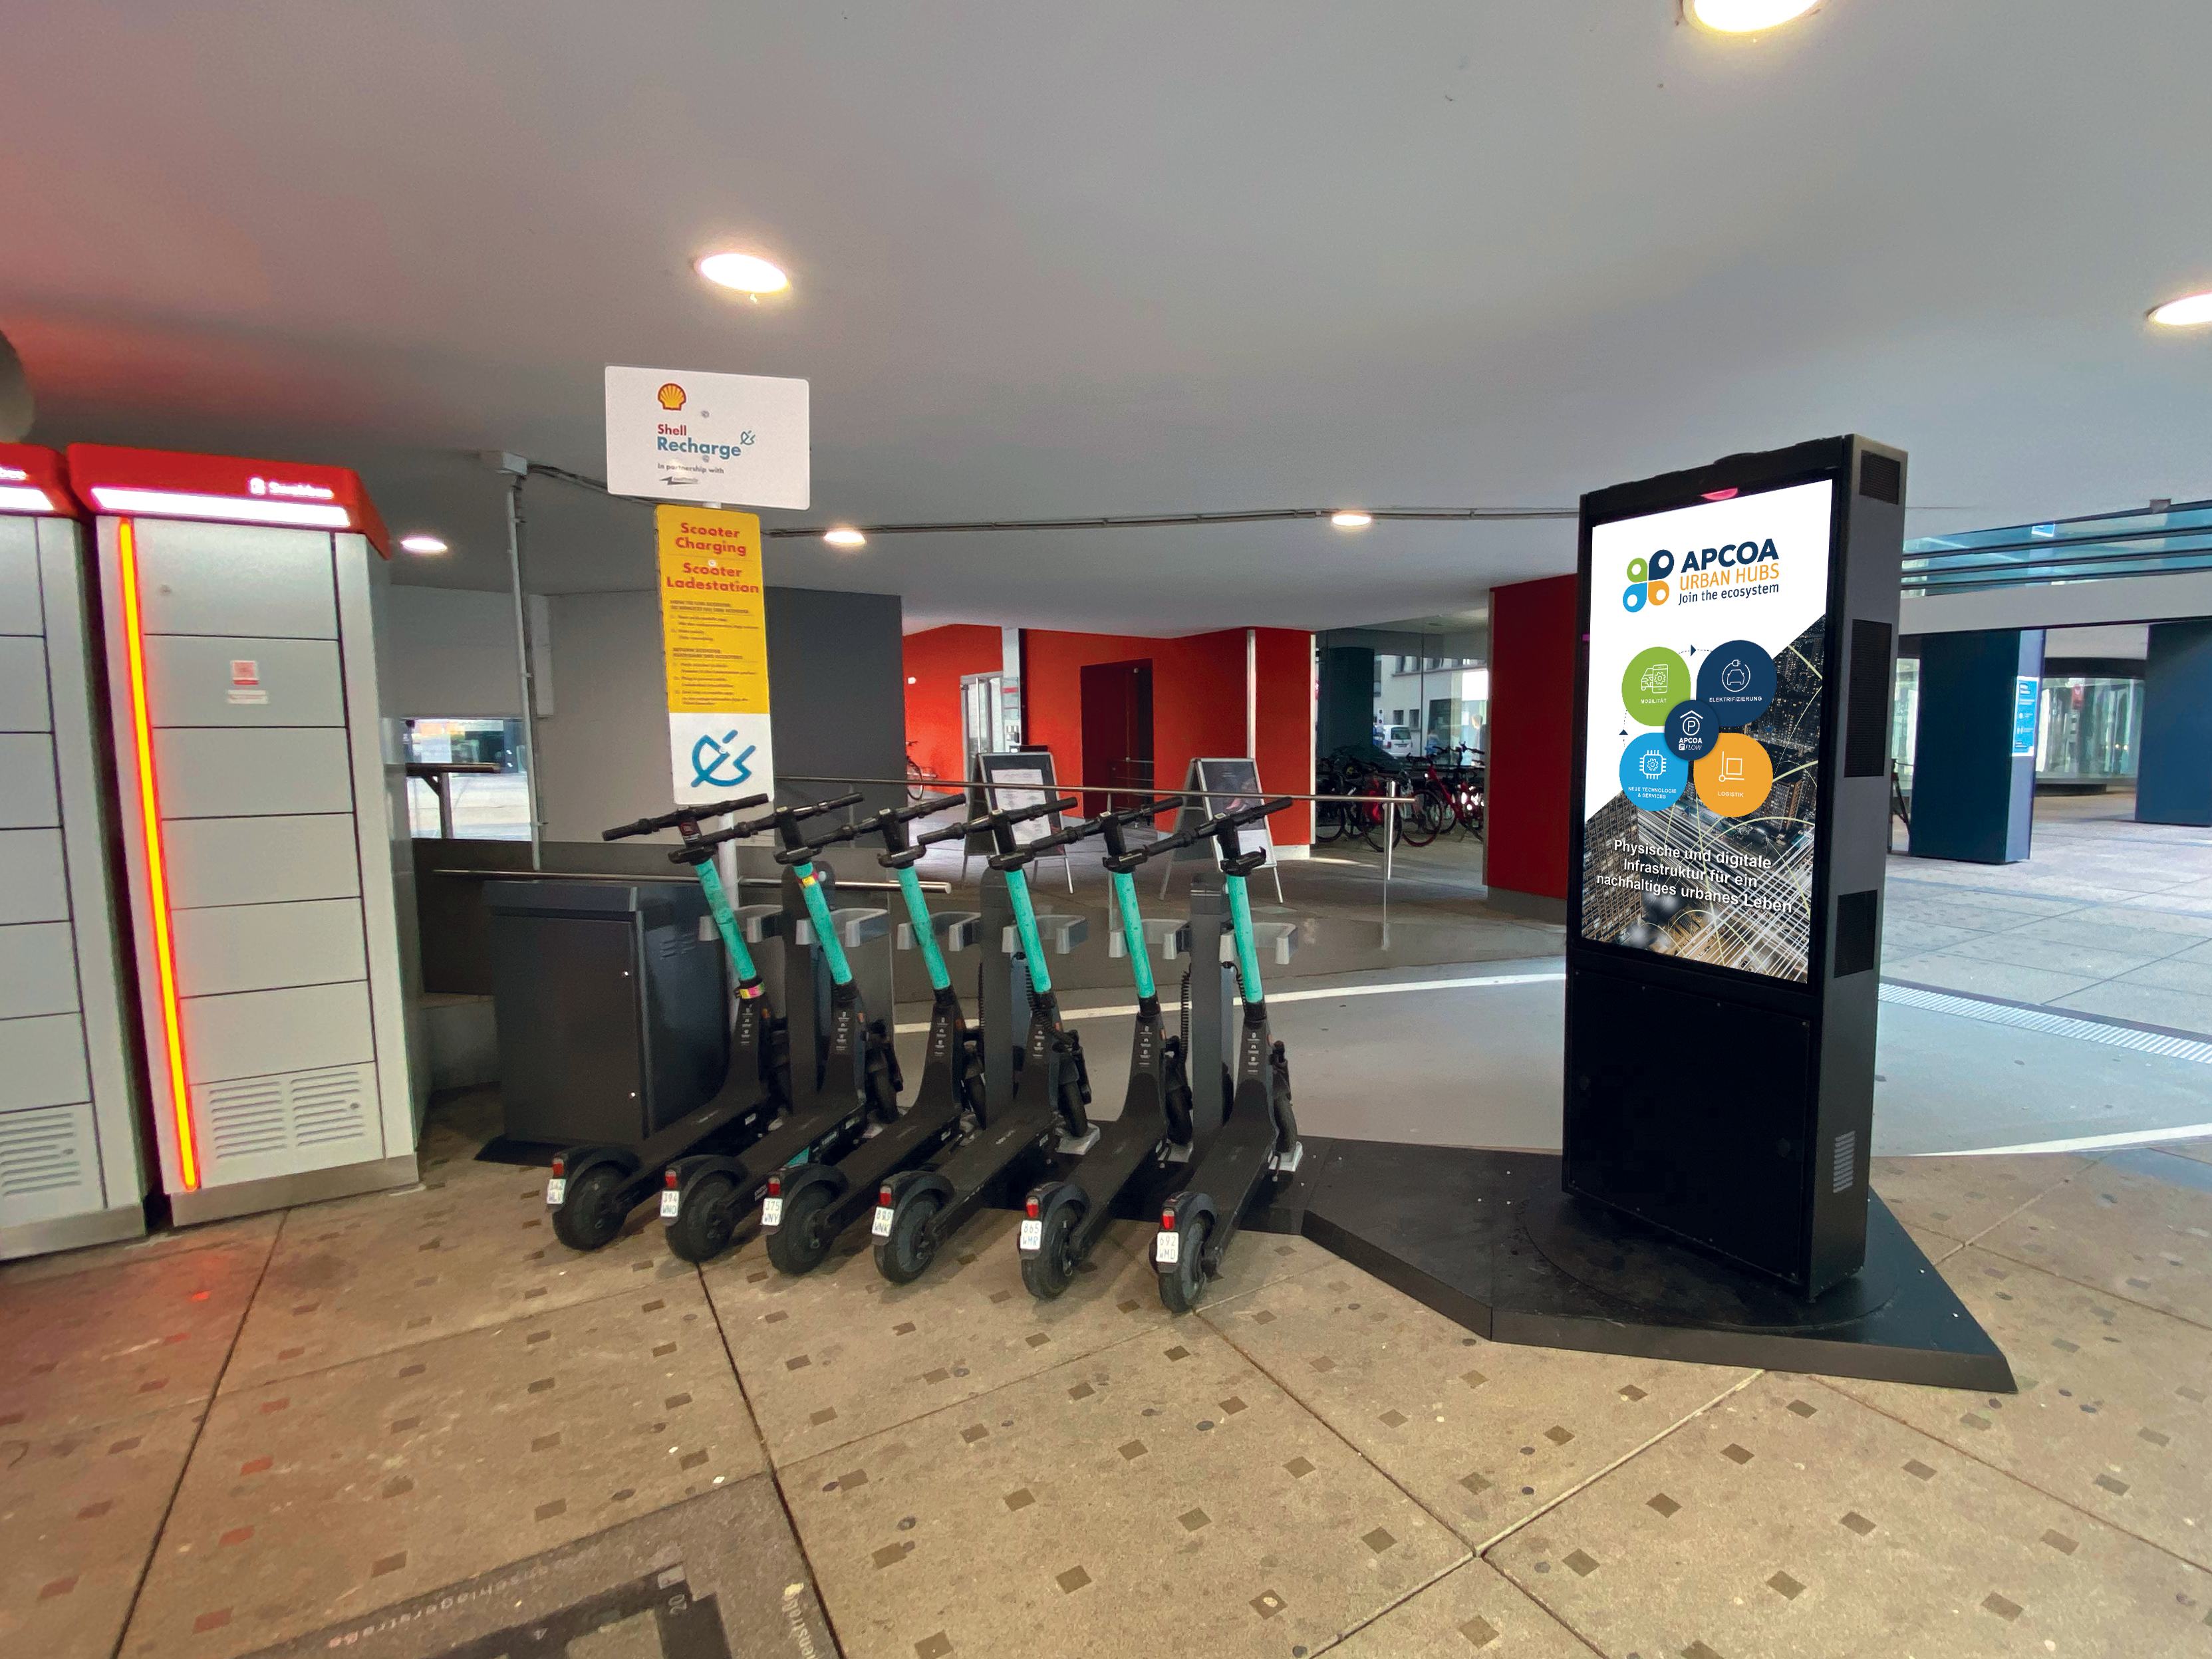 Swiftmile charging stations Apcoa parking garages Tier electric scooters Germany Stuttgart